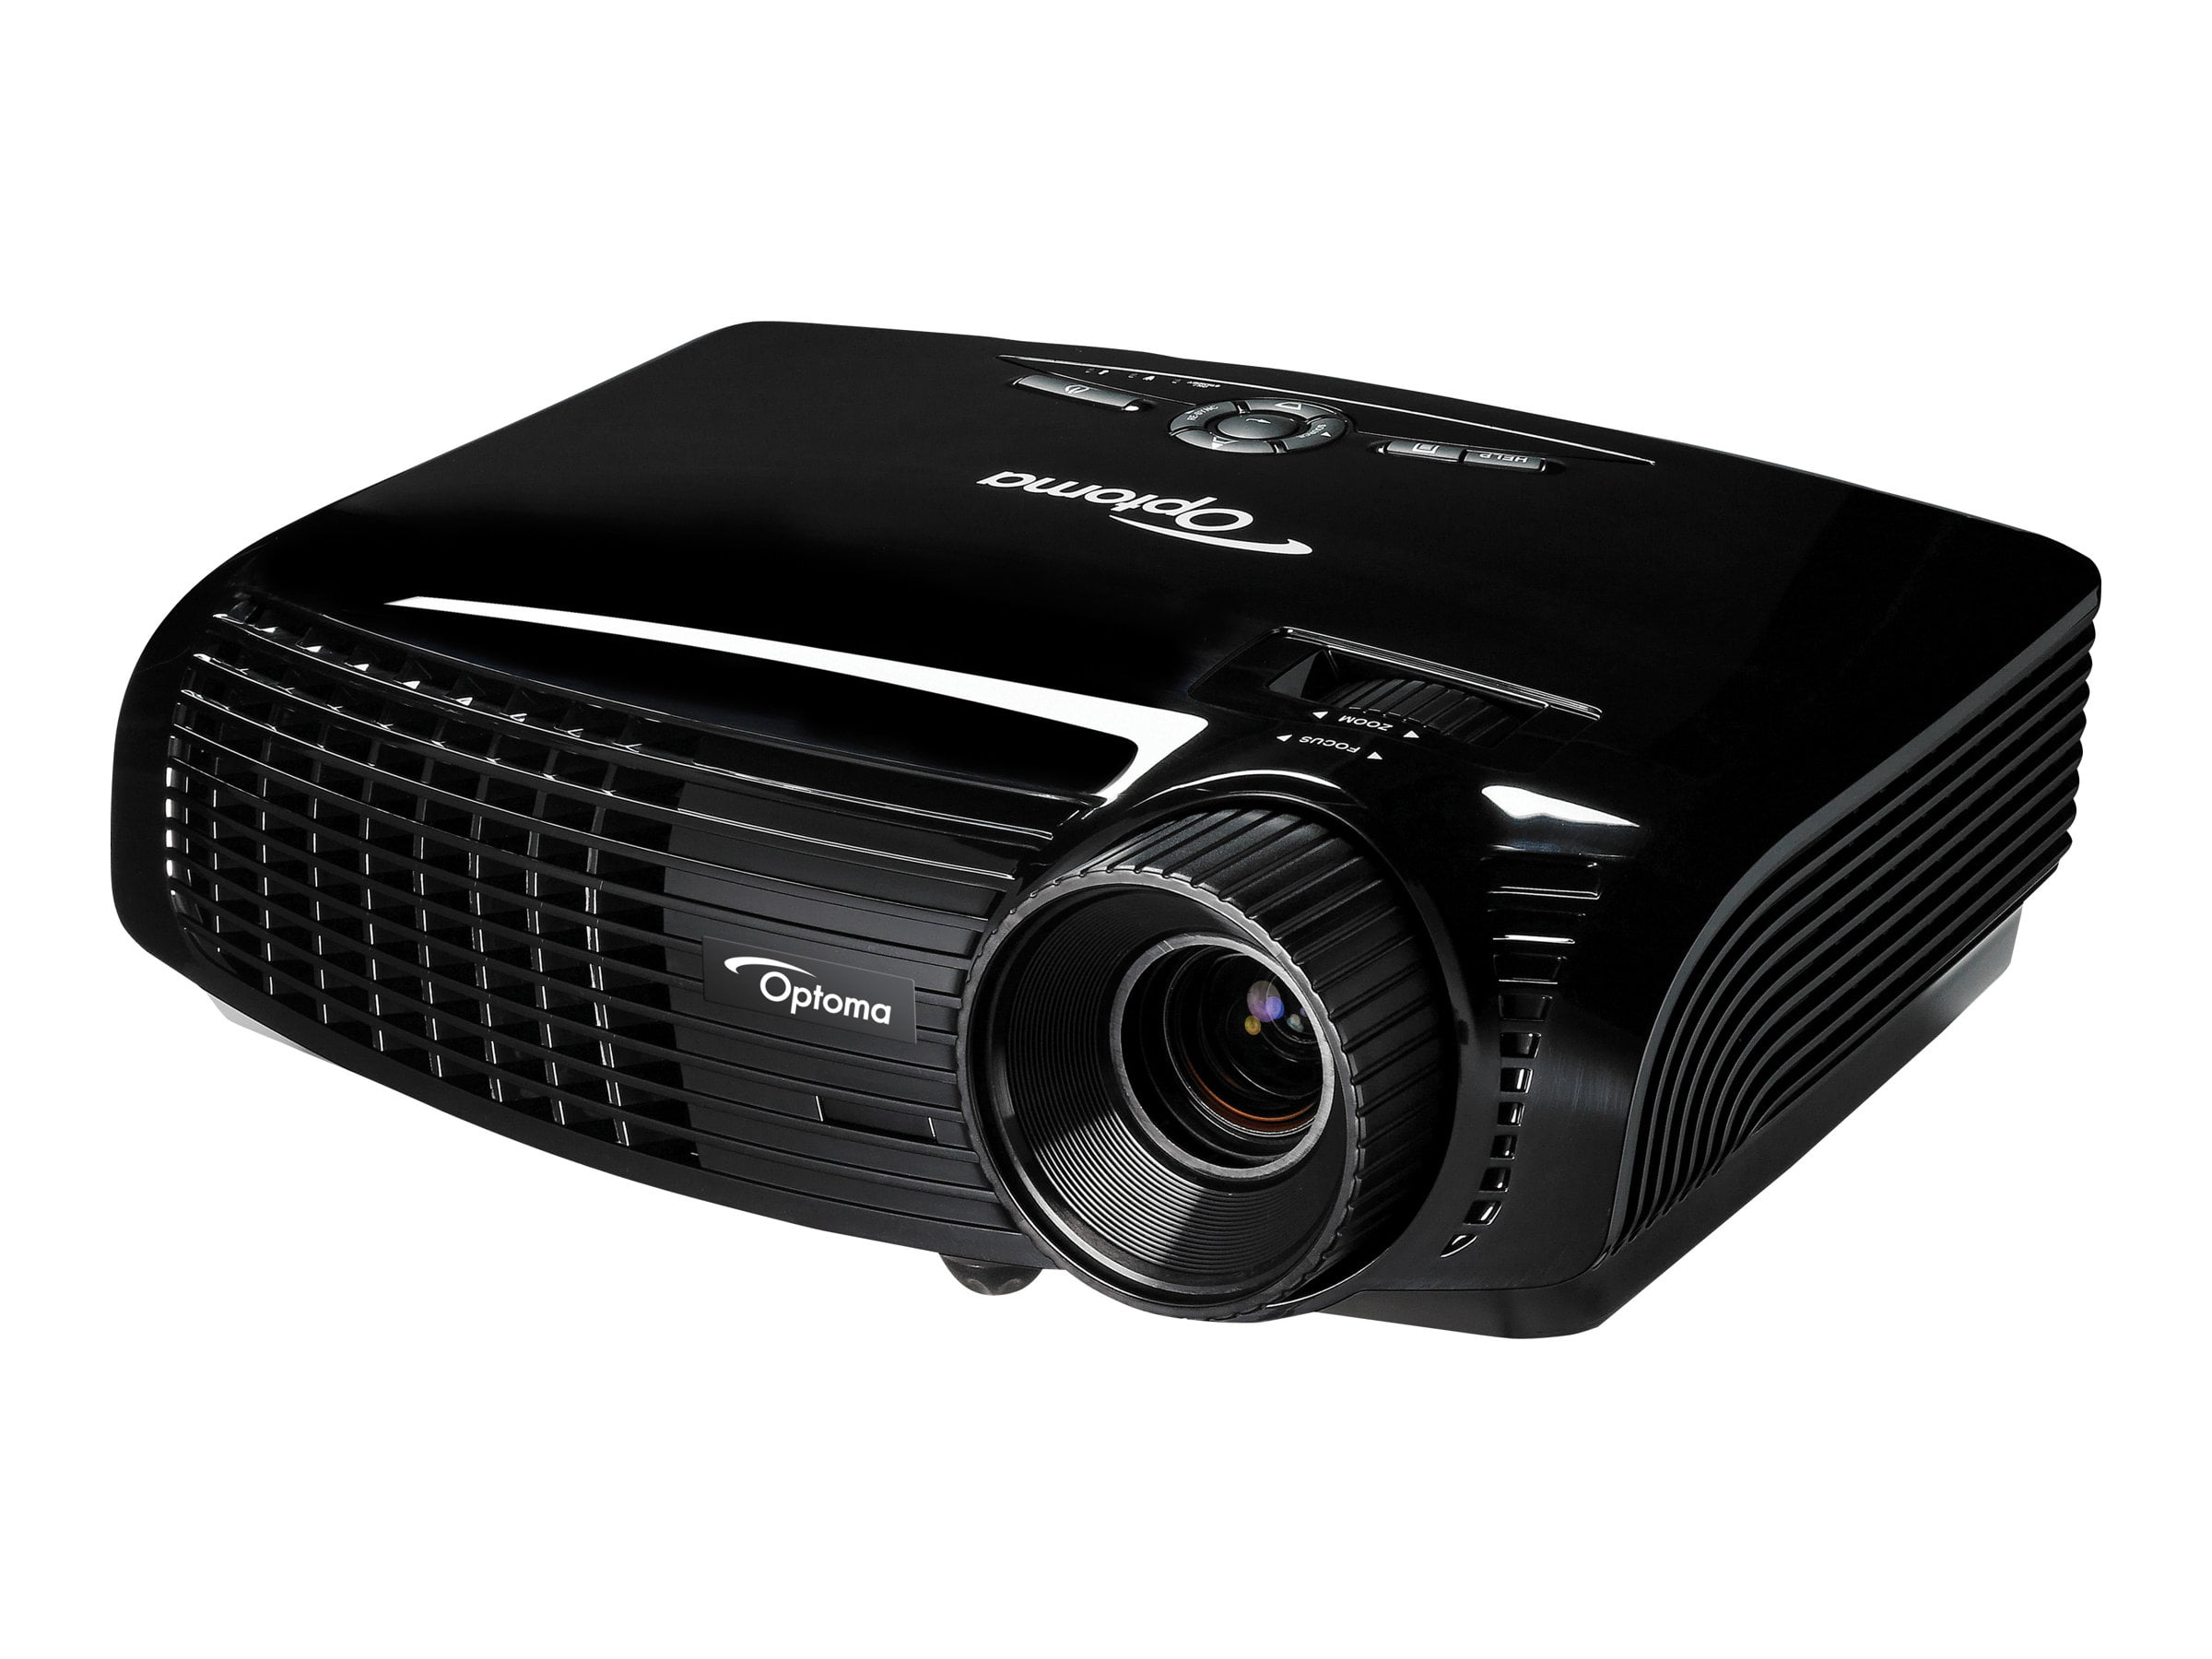 Optoma 1080p 3D DLP Home Theater Projector